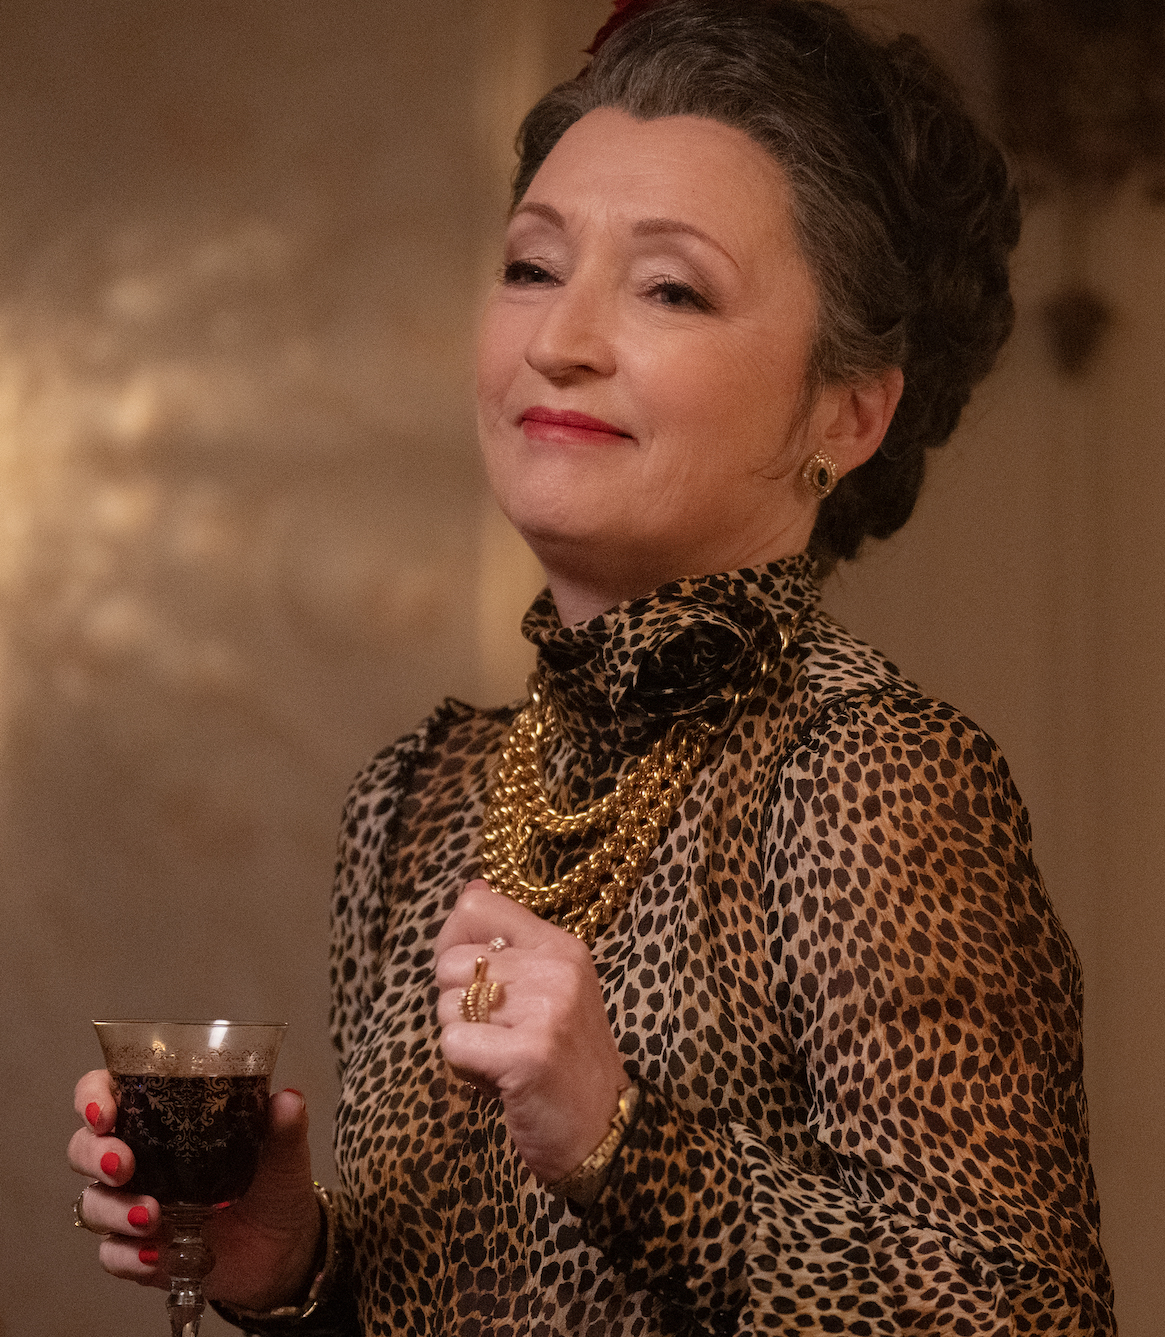 Lesley Manville as Cunthia Winehouse in Back to Black